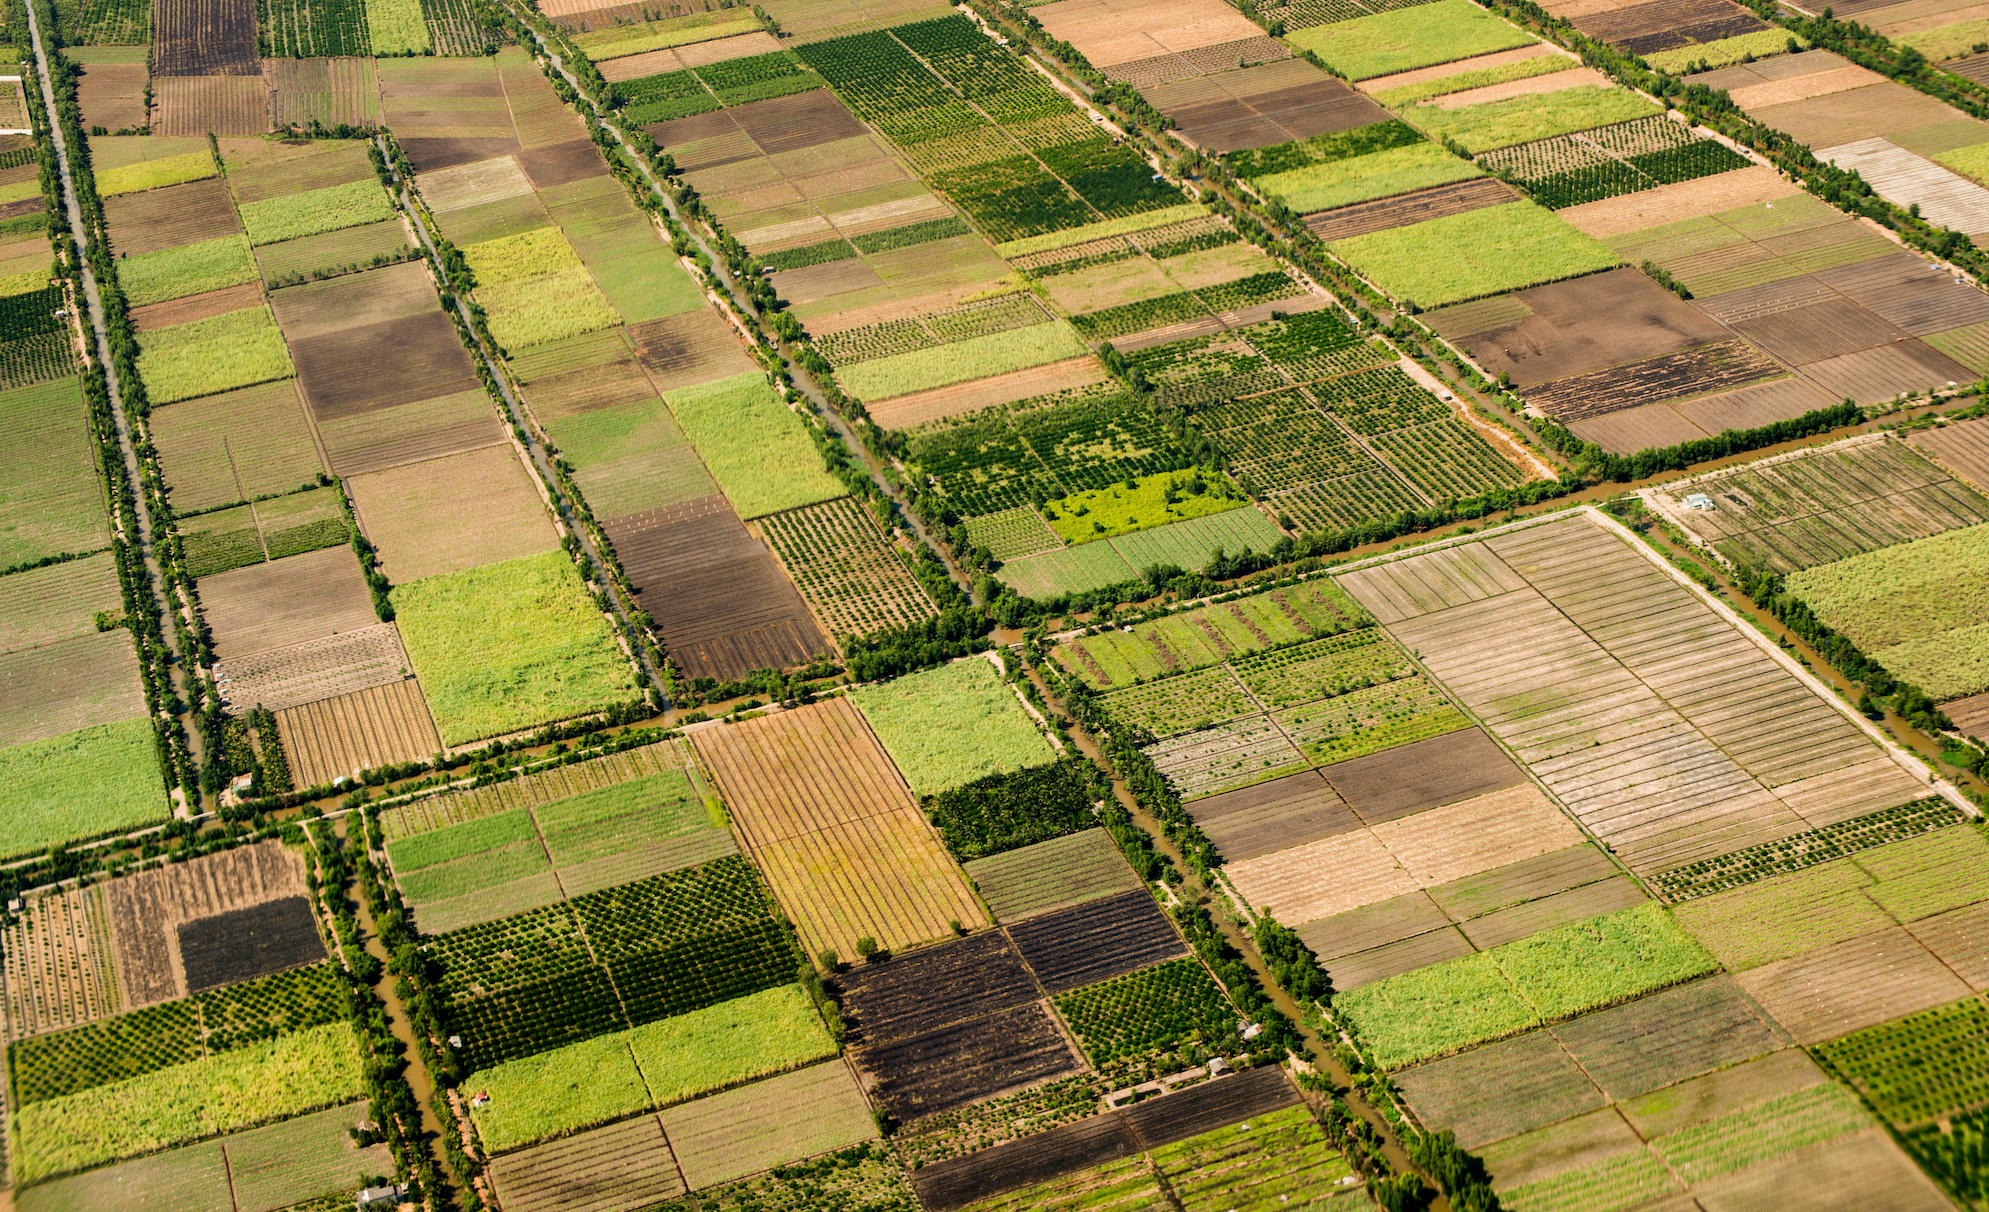 Photograph of an aerial view of a field of green, yellow, and brown farmland.